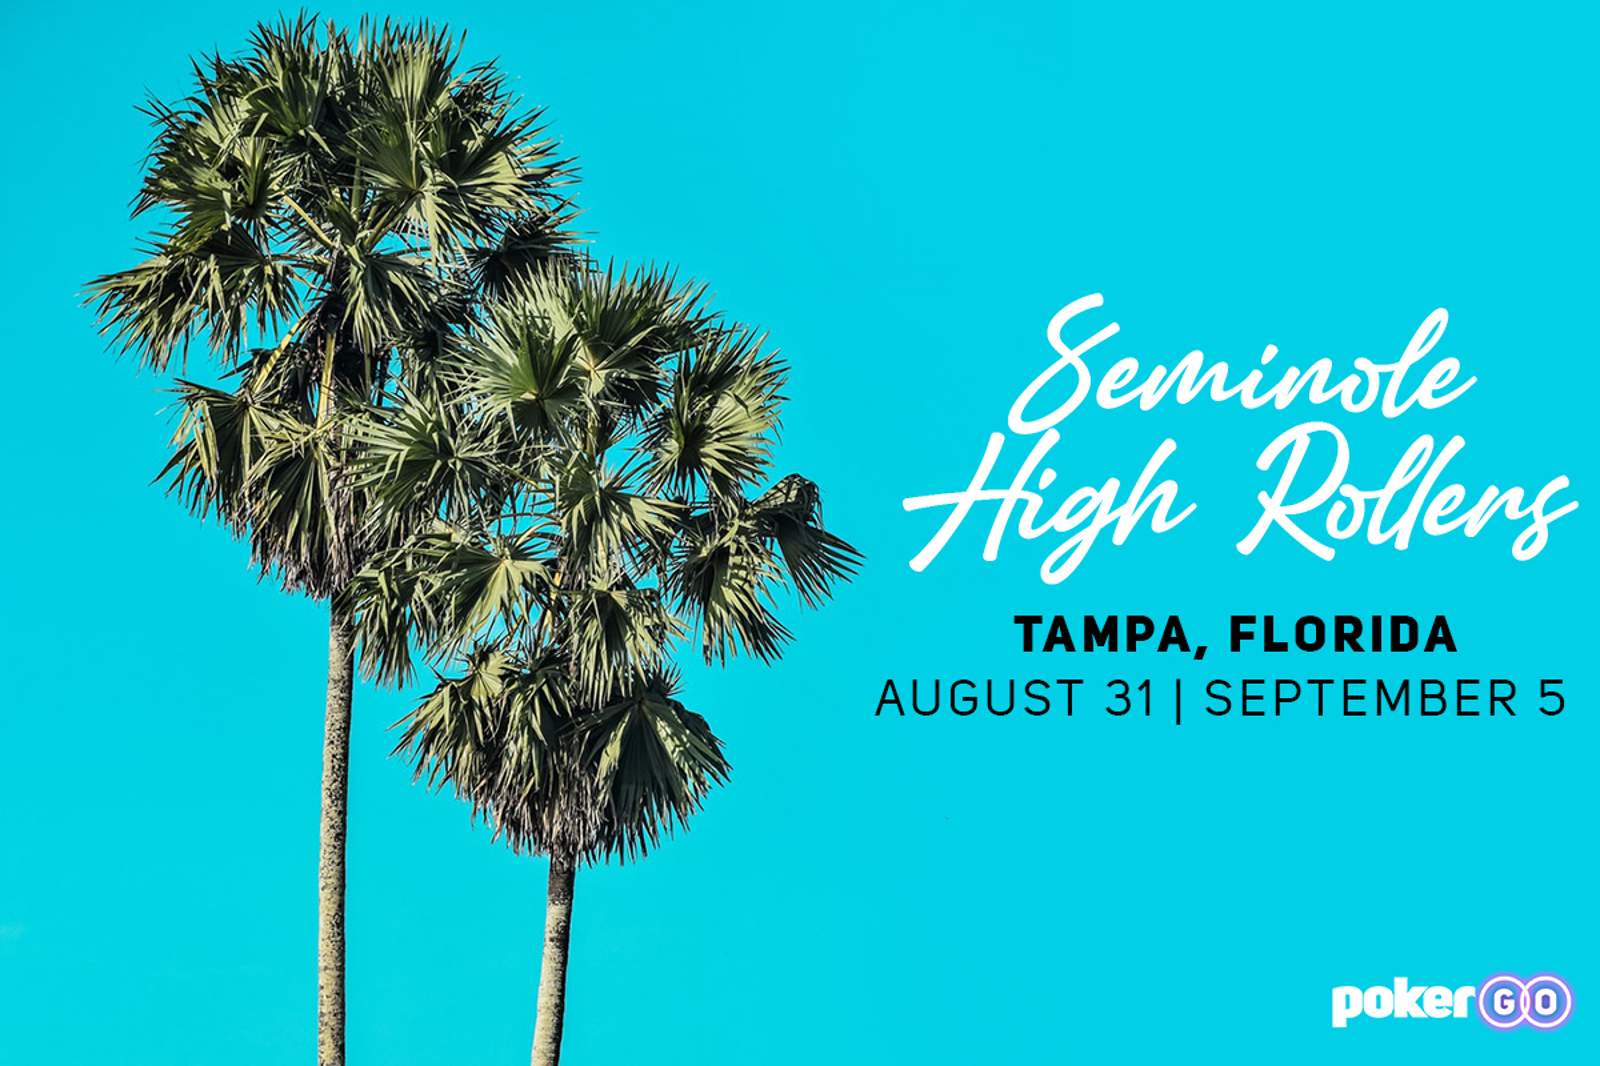 Seminole Tampa to Host 2 High Rollers Starting August 31